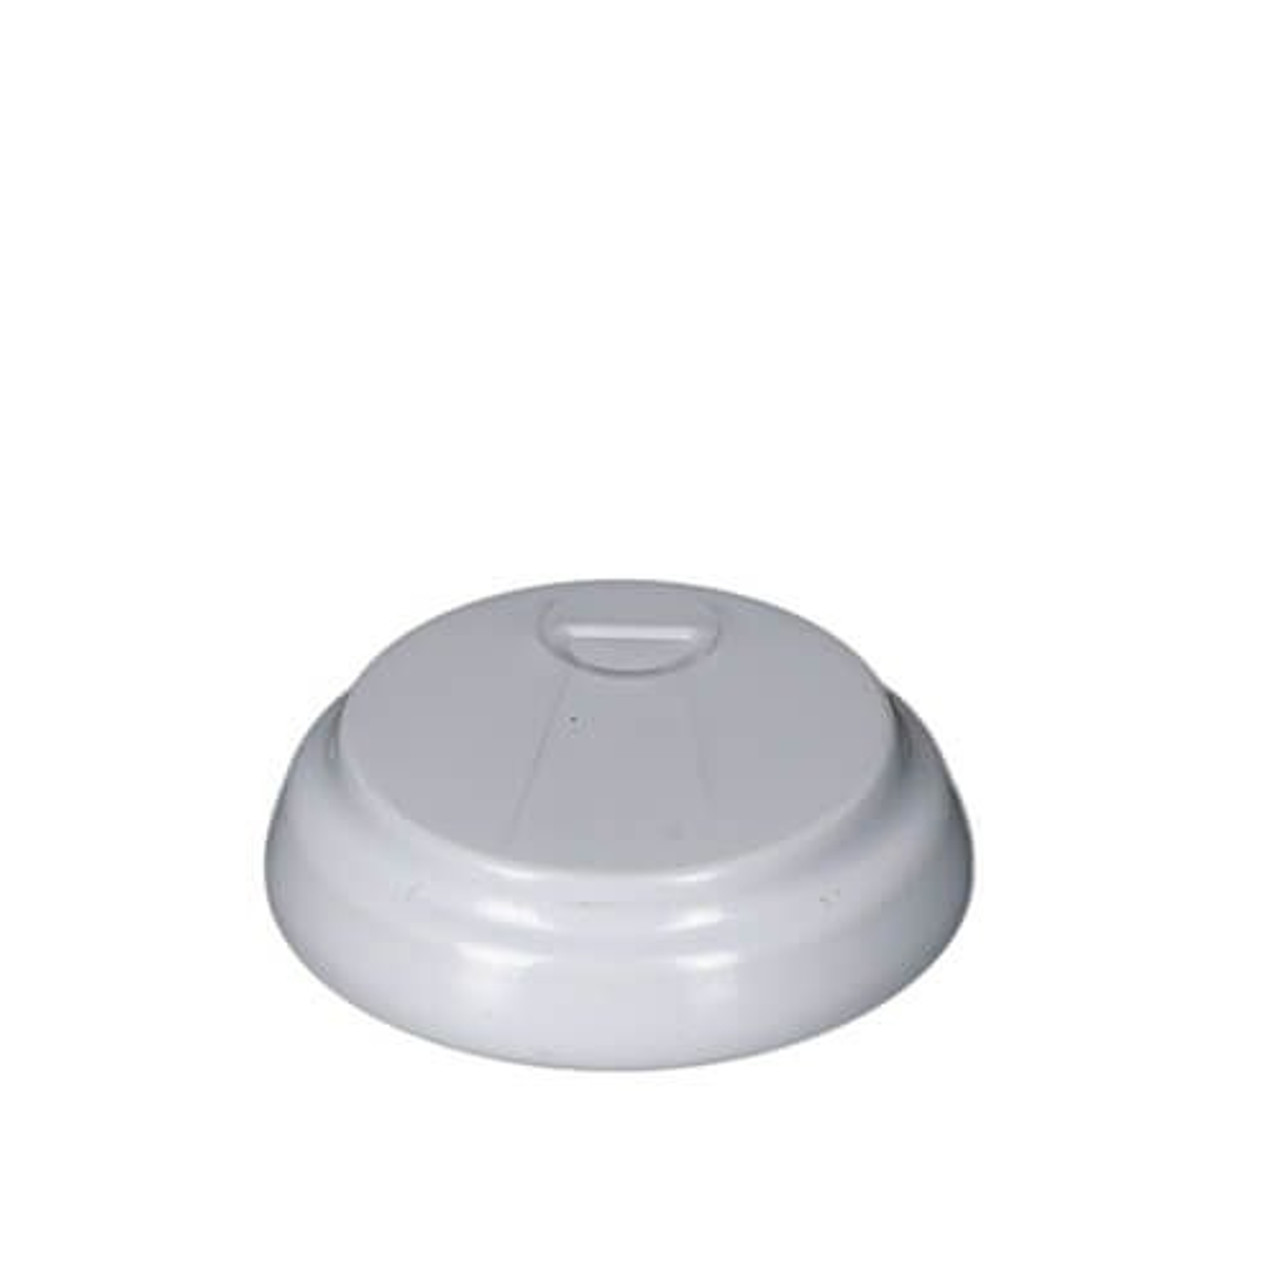 3/4 INCH VGII® CAPSEAL FOR STEEL PLUGS